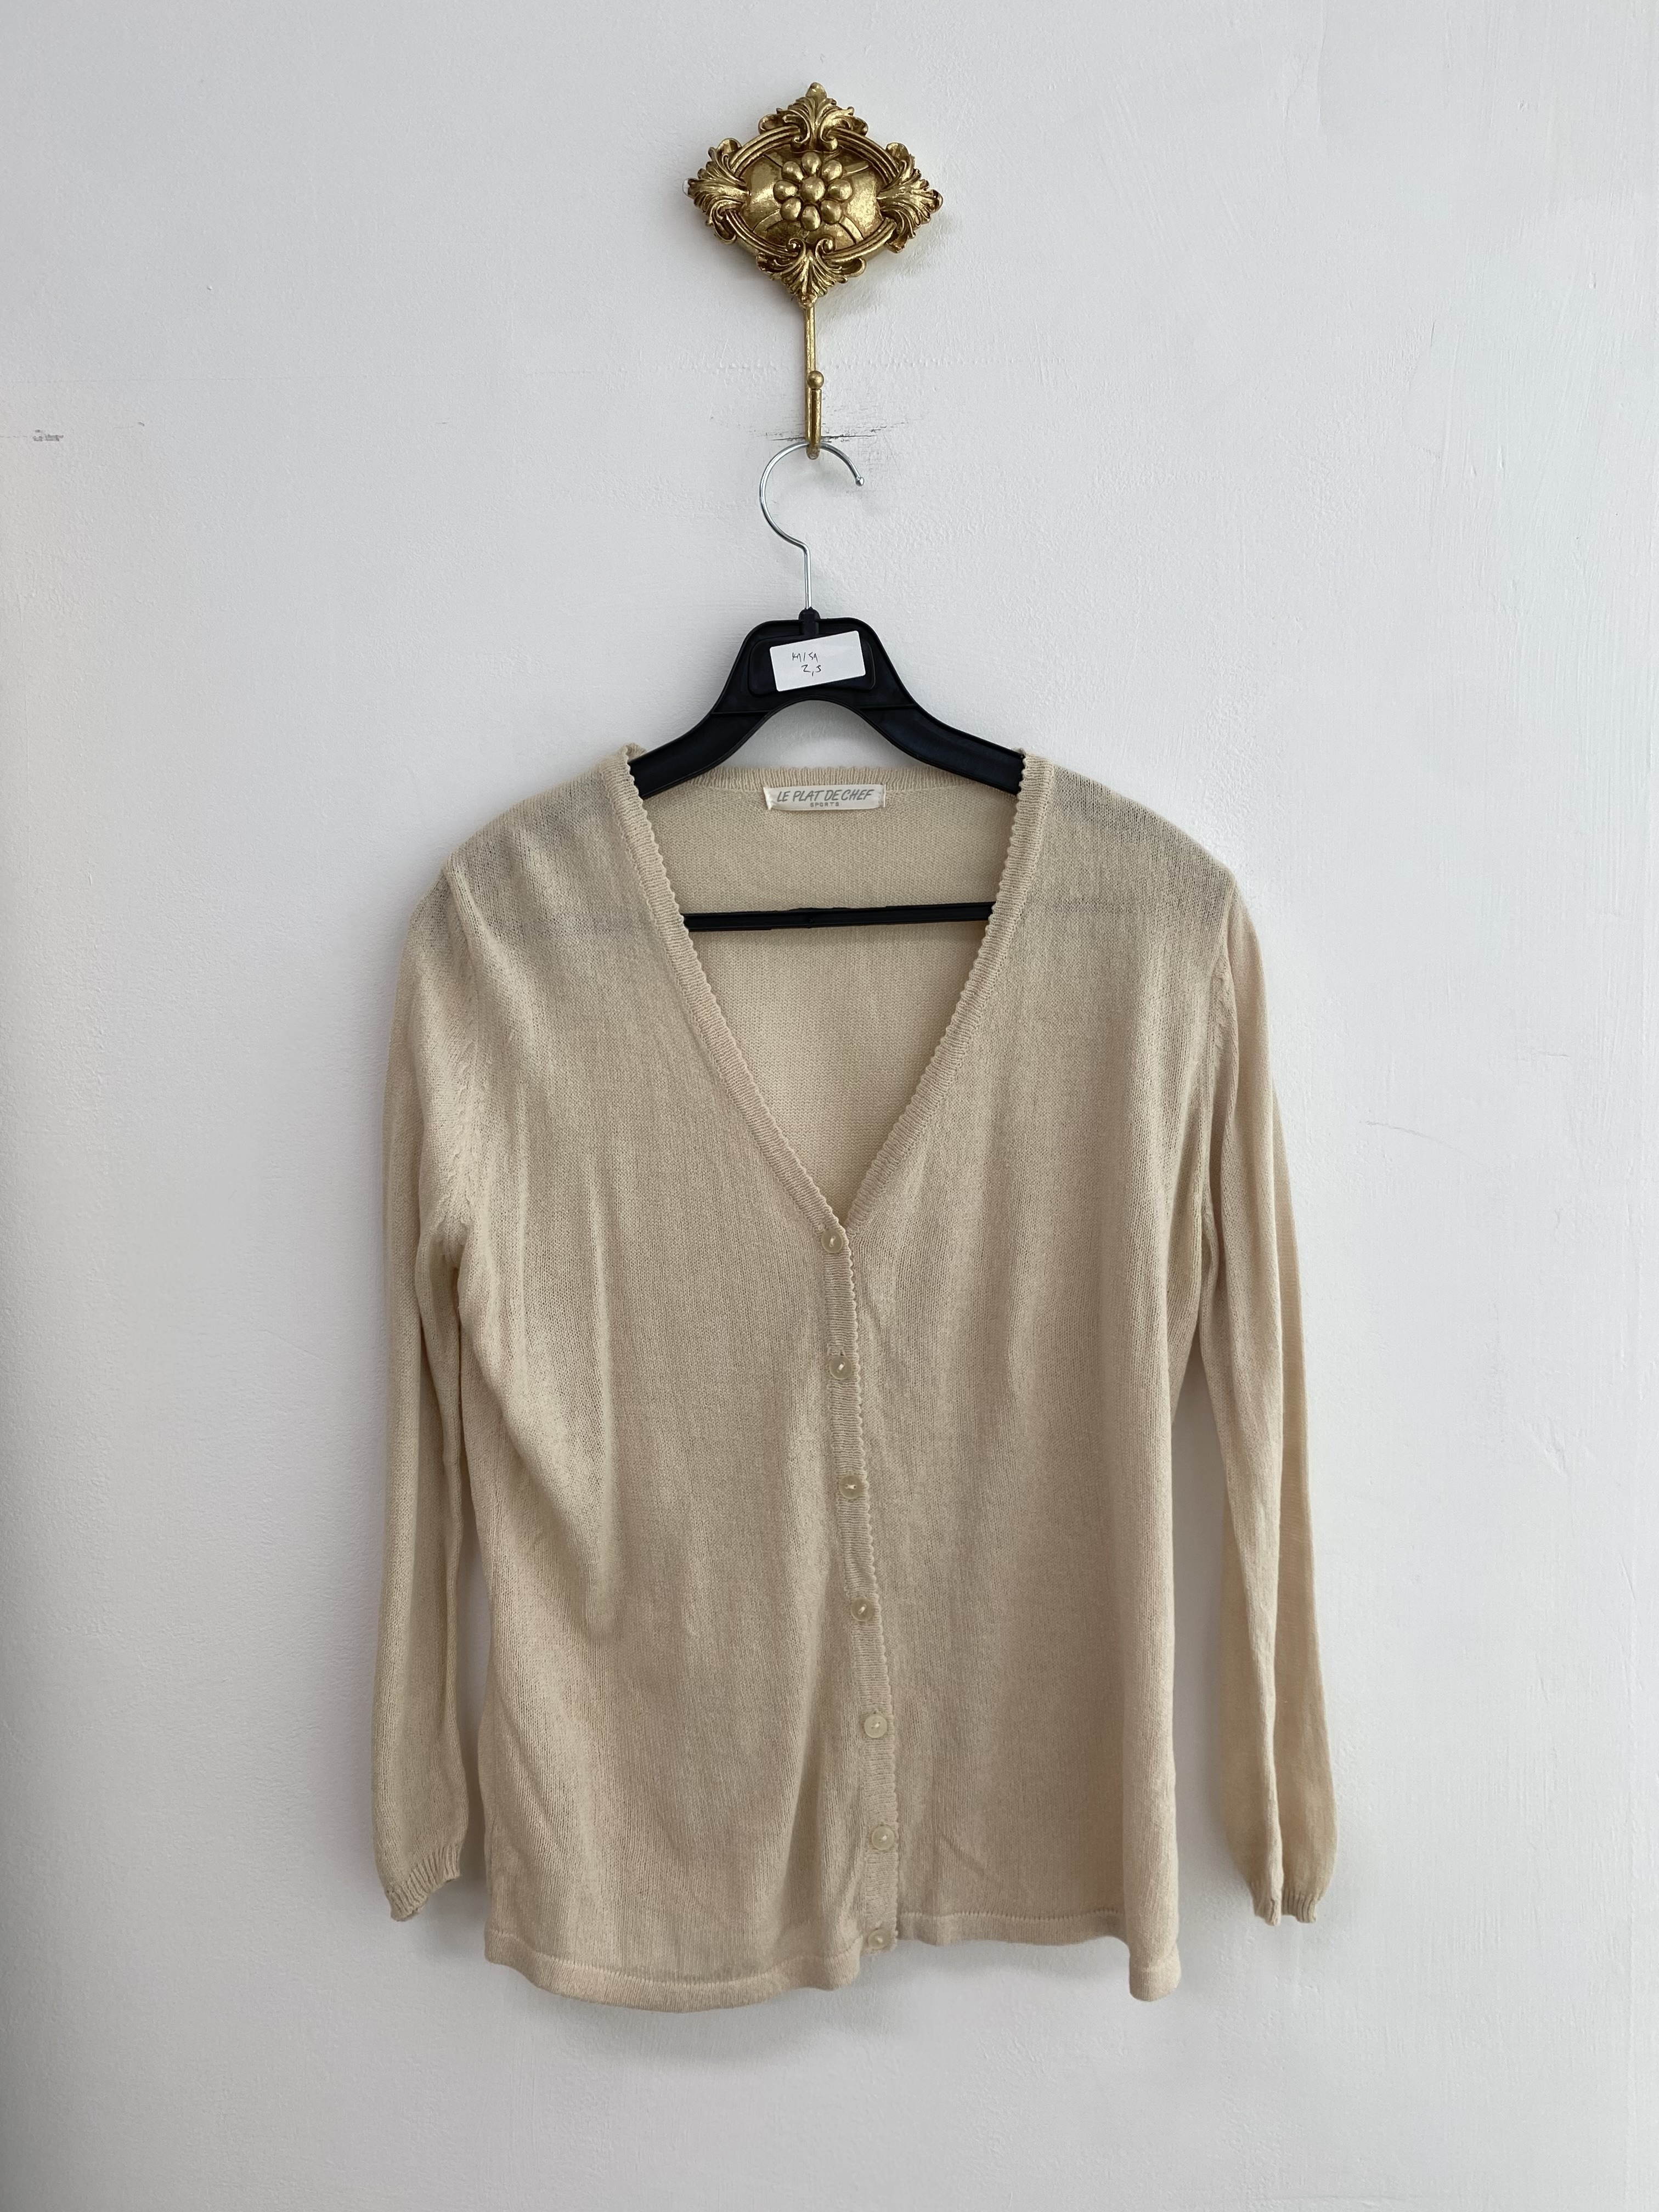 Beige lace cool button cardigan